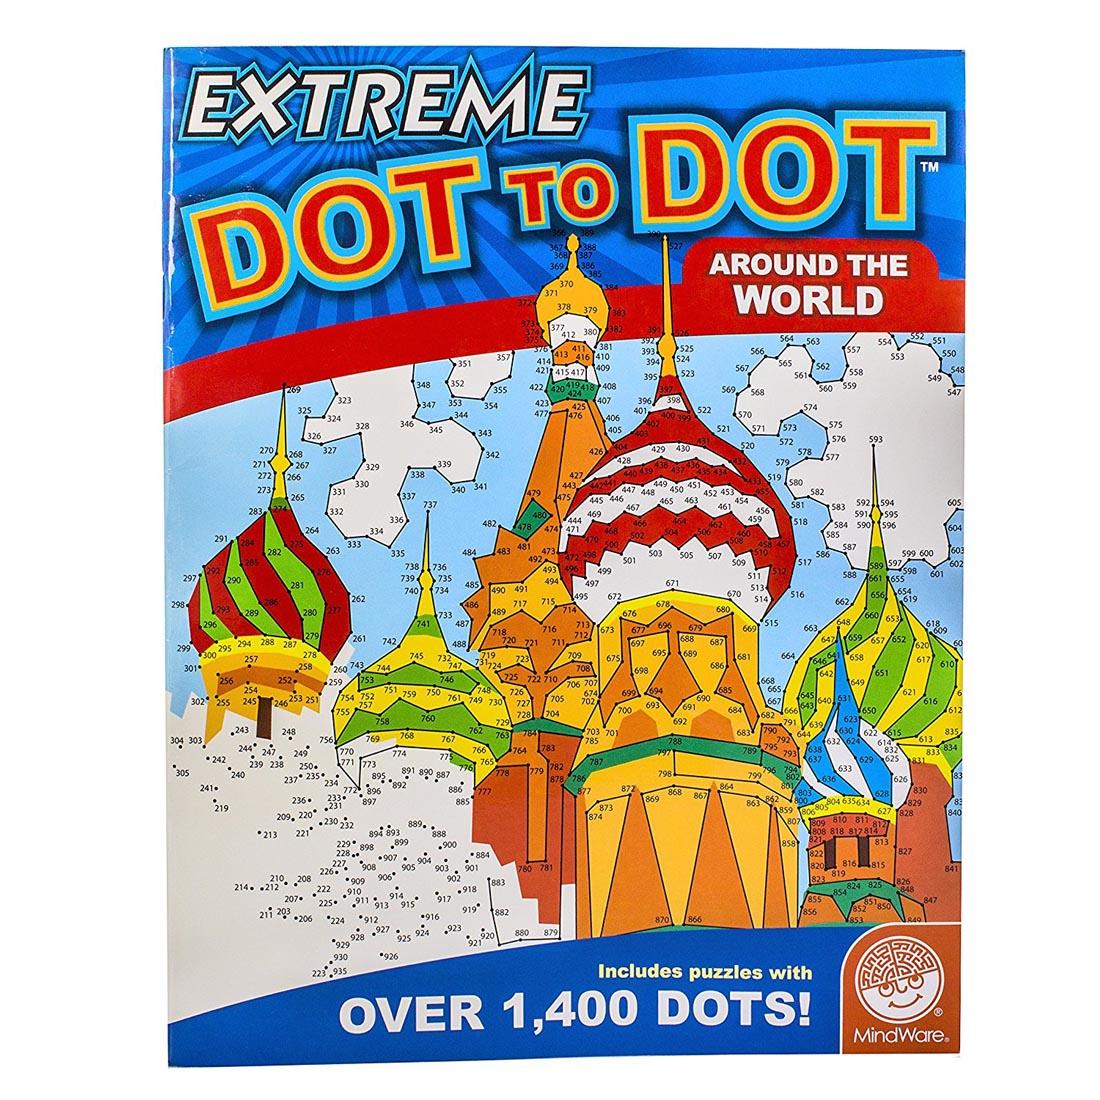 Around The World Extreme Dot To Dot Puzzles